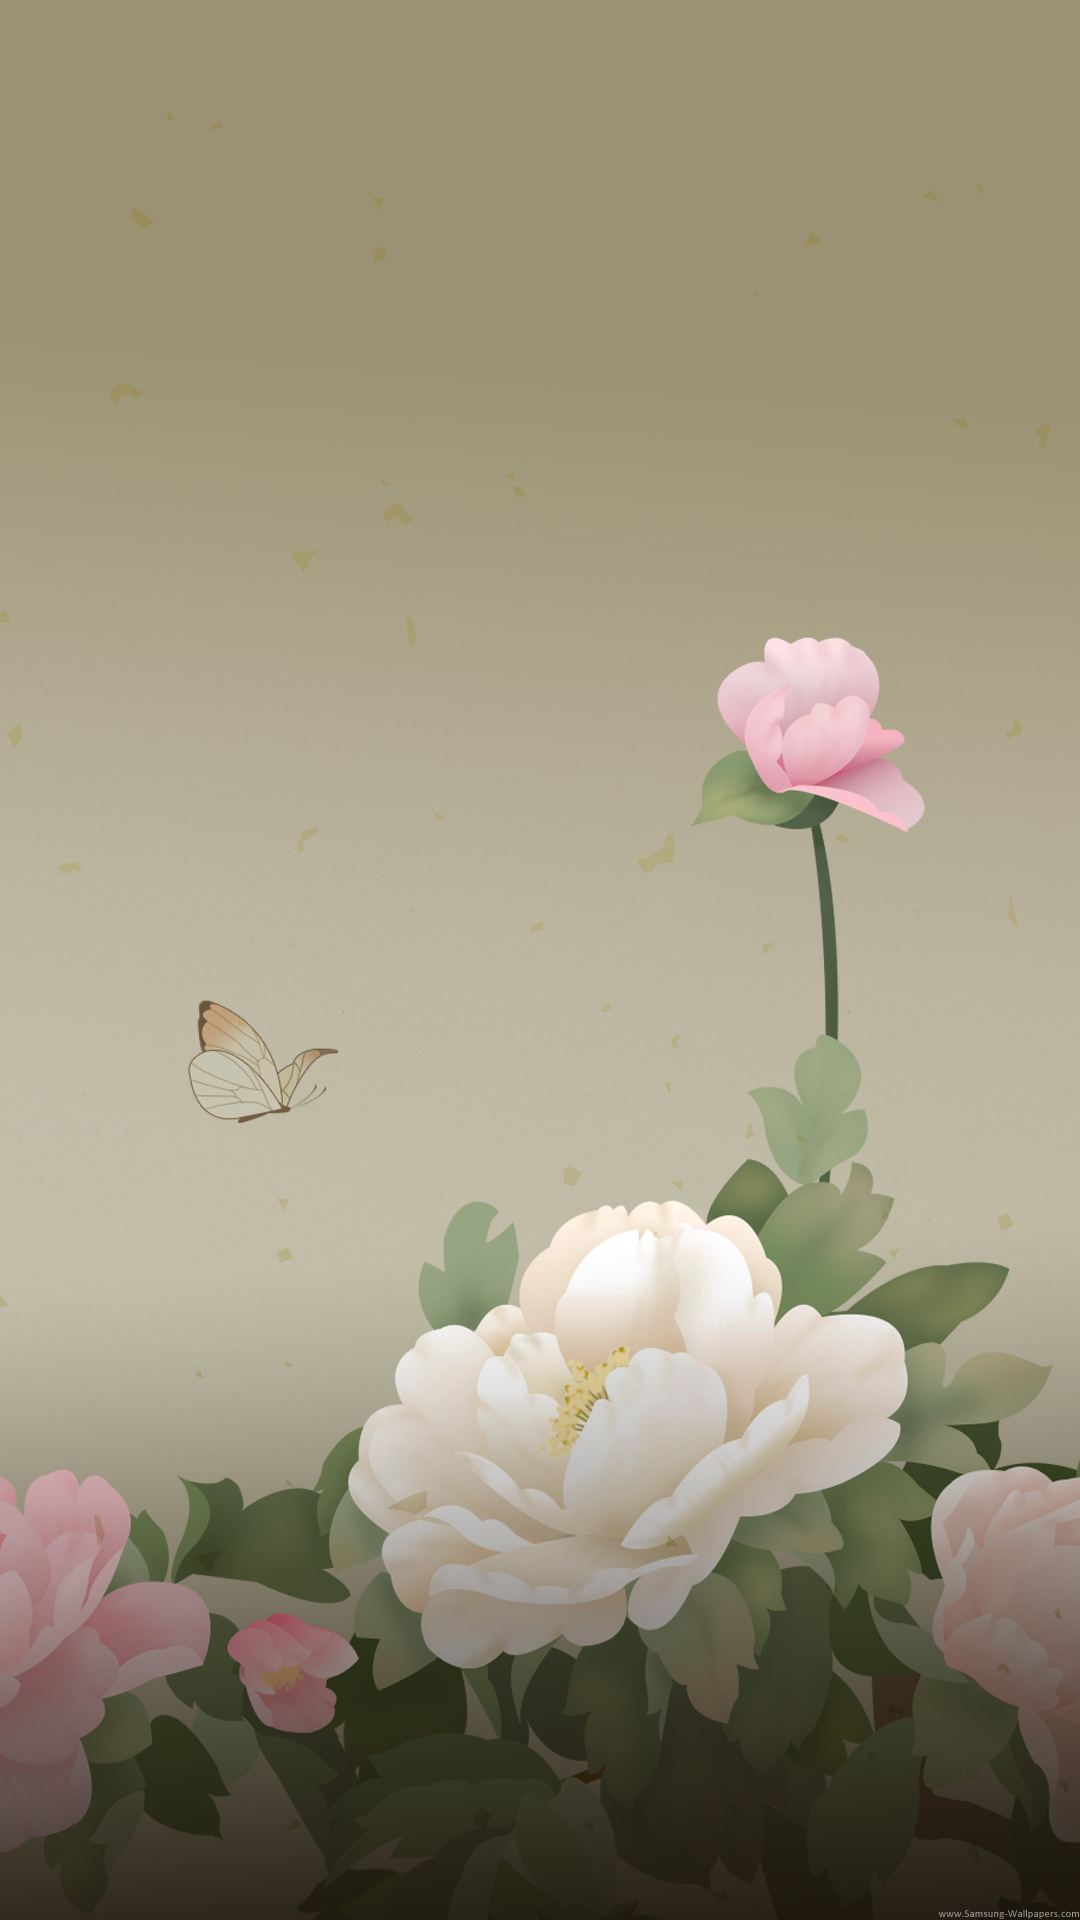 Antique Flower And Butterfly Painting Iphone Wallpapers